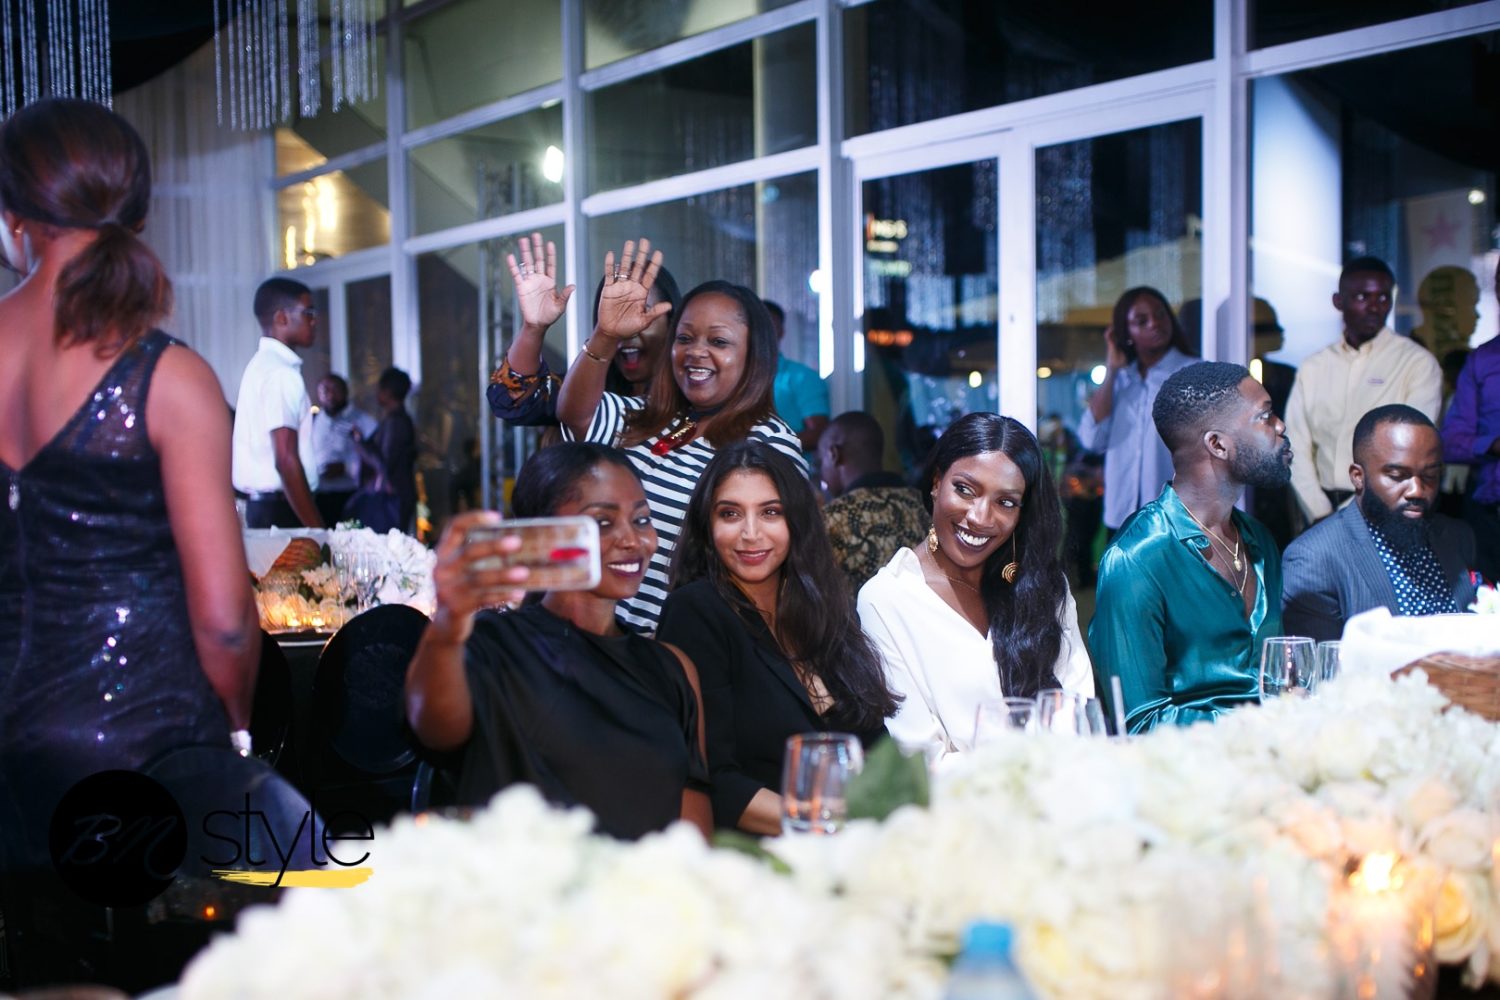 EXCLUSIVE: Here’s What Happened Last Night at “The Gathering”- Fashion Business Dinner @ Lagos Fashion Week 2018